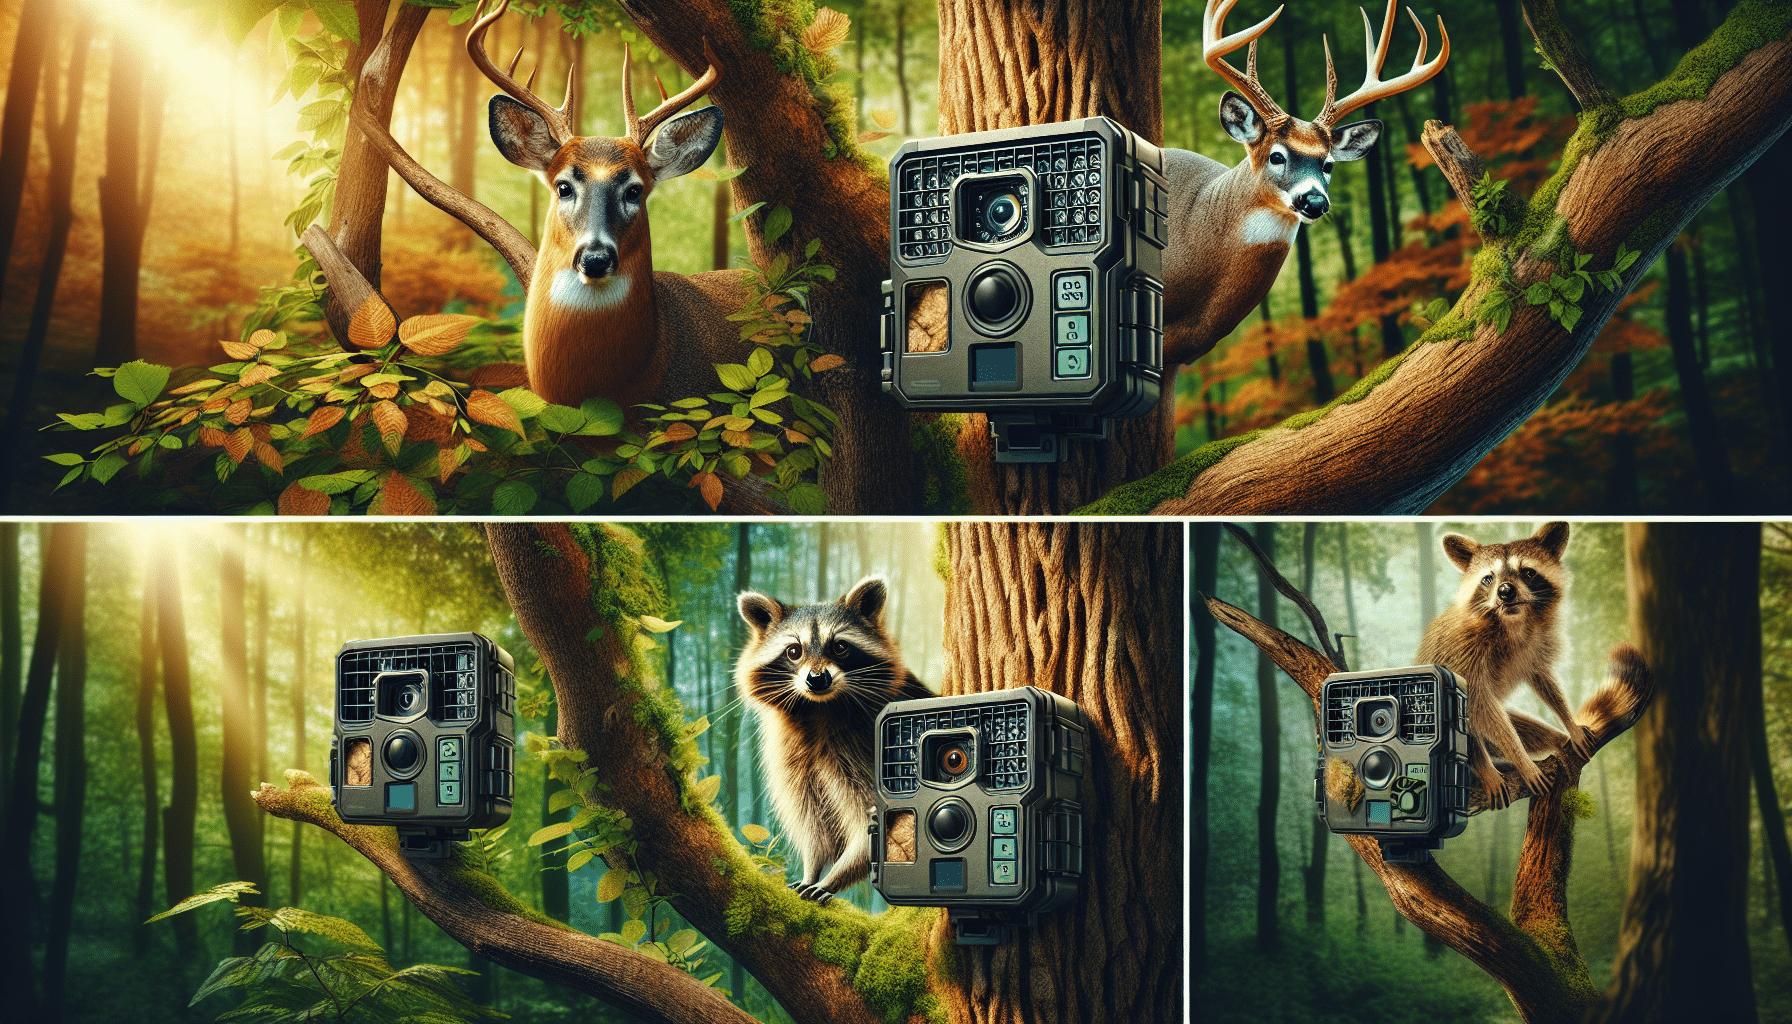 Picture a trio of trail cameras perched on tree branches in the wilderness. Each trail camera is different, displaying an array of useful features such as powerful flashlight, large lenses, and sturdy construction. They are cleverly tucked away, blending seamlessly with their natural surroundings of vibrant foliage and rugged bark. Different wildlife, including a deer, a raccoon, and a bird, are captured in the field of vision of these cameras. These creatures seem undisturbed and semi-transparent time and date stamps on each image indicate it's April of 2024. Please note, the image should be free of text, people, brand names or logos.